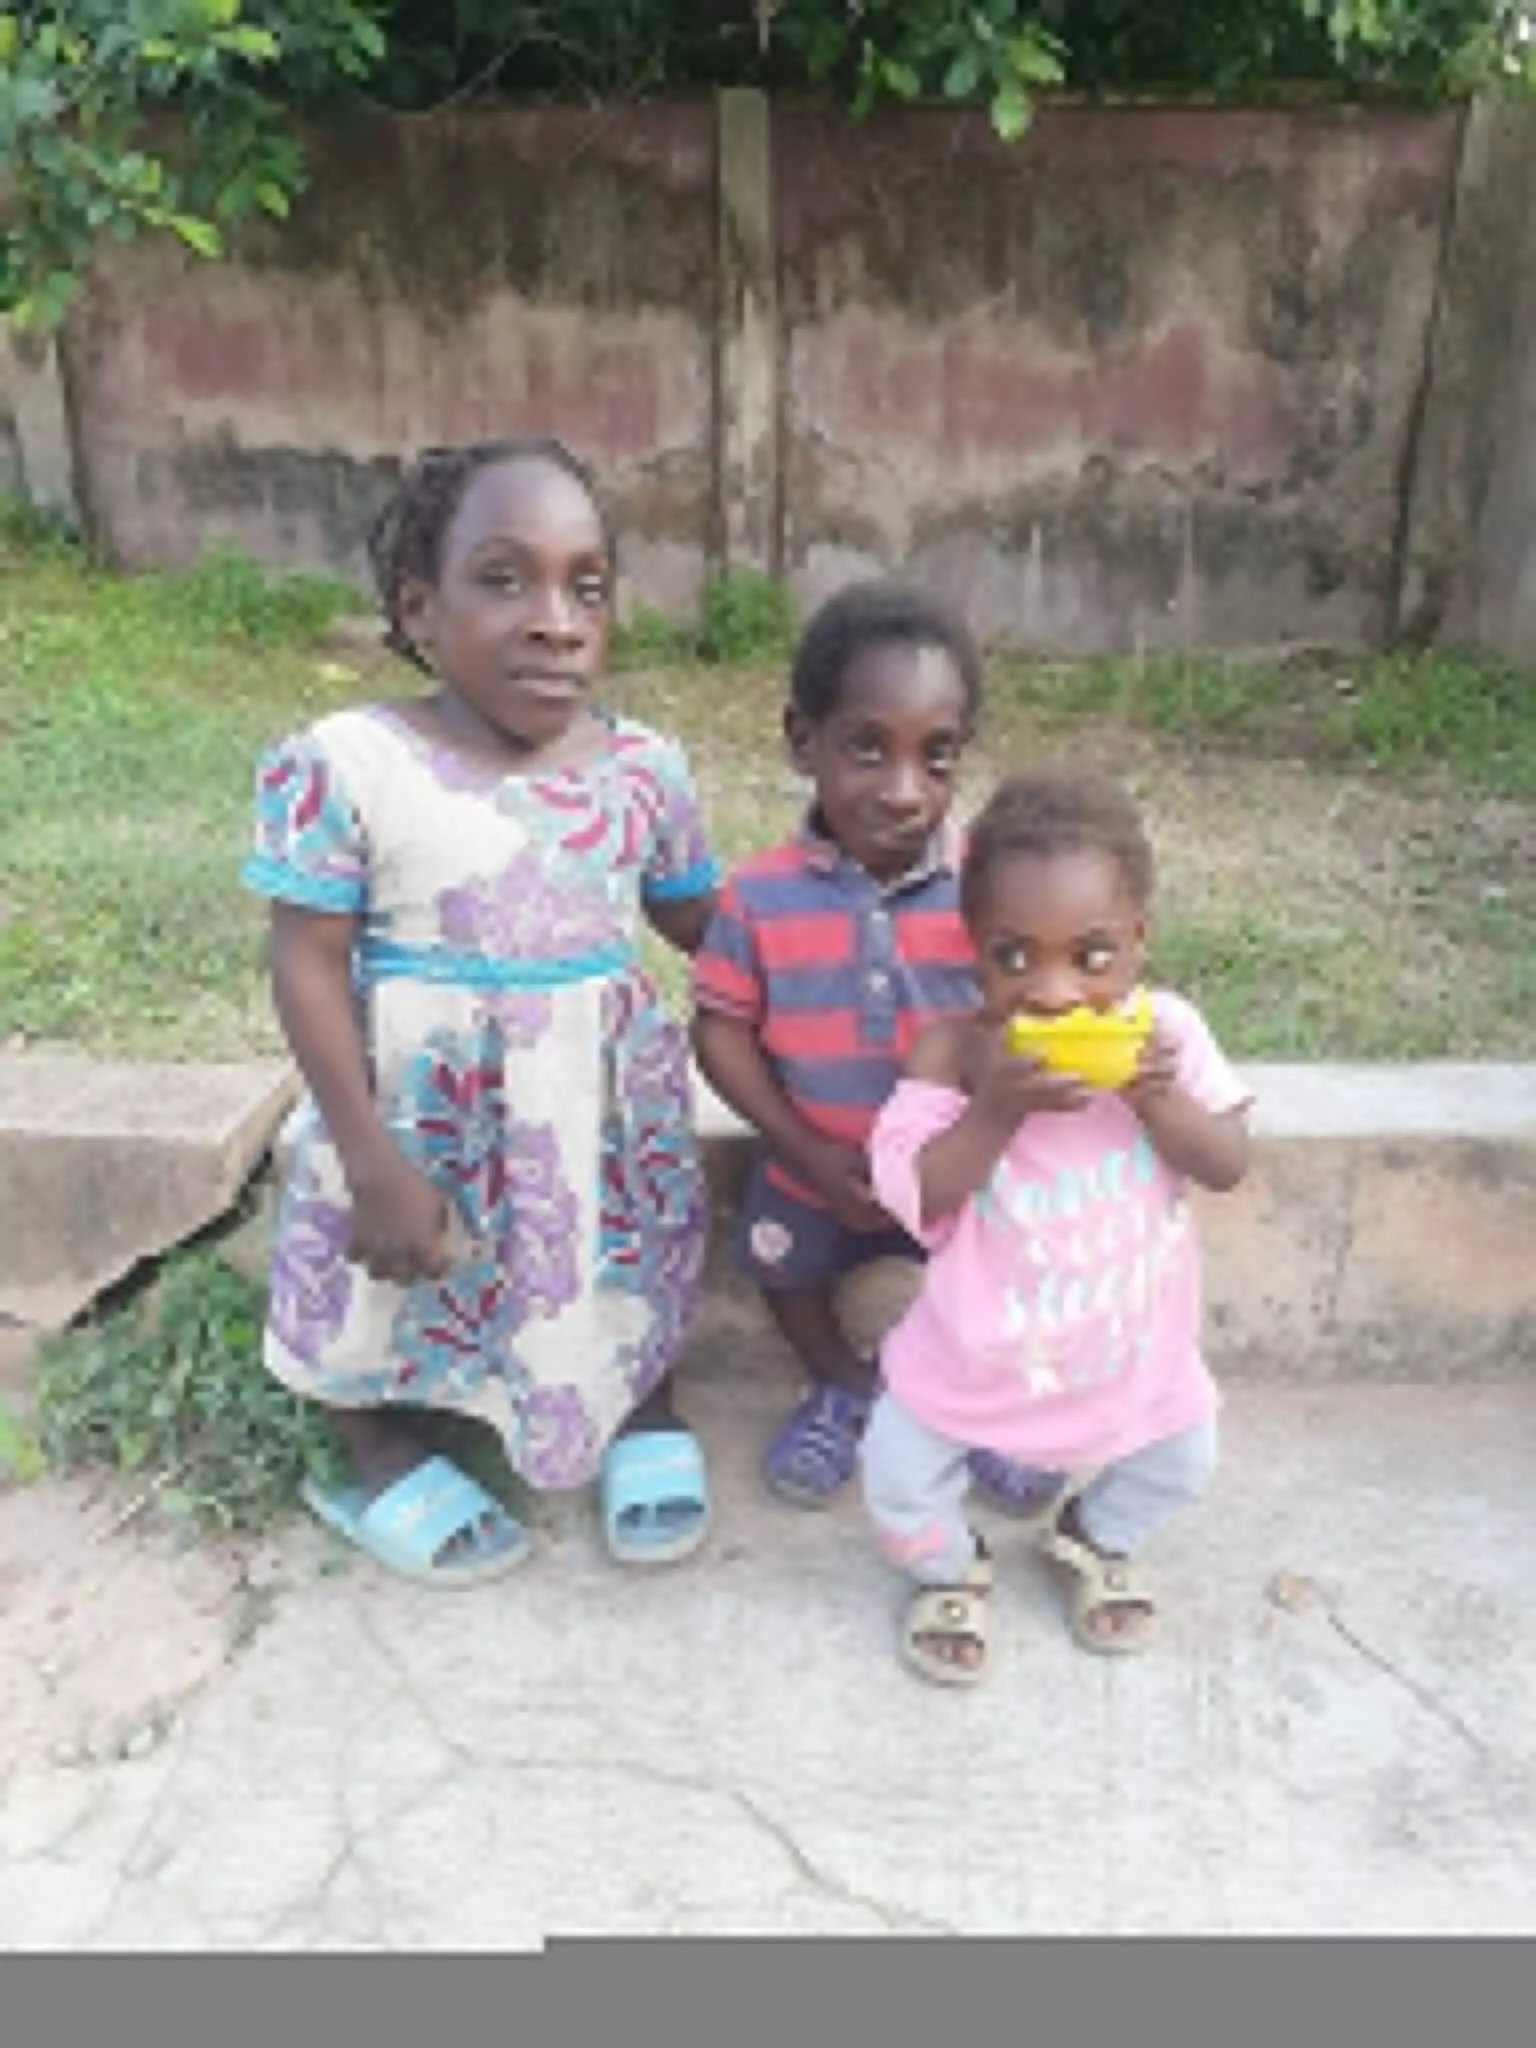 Mother of 3 with Achondroplasia seeks end to stigmatisation